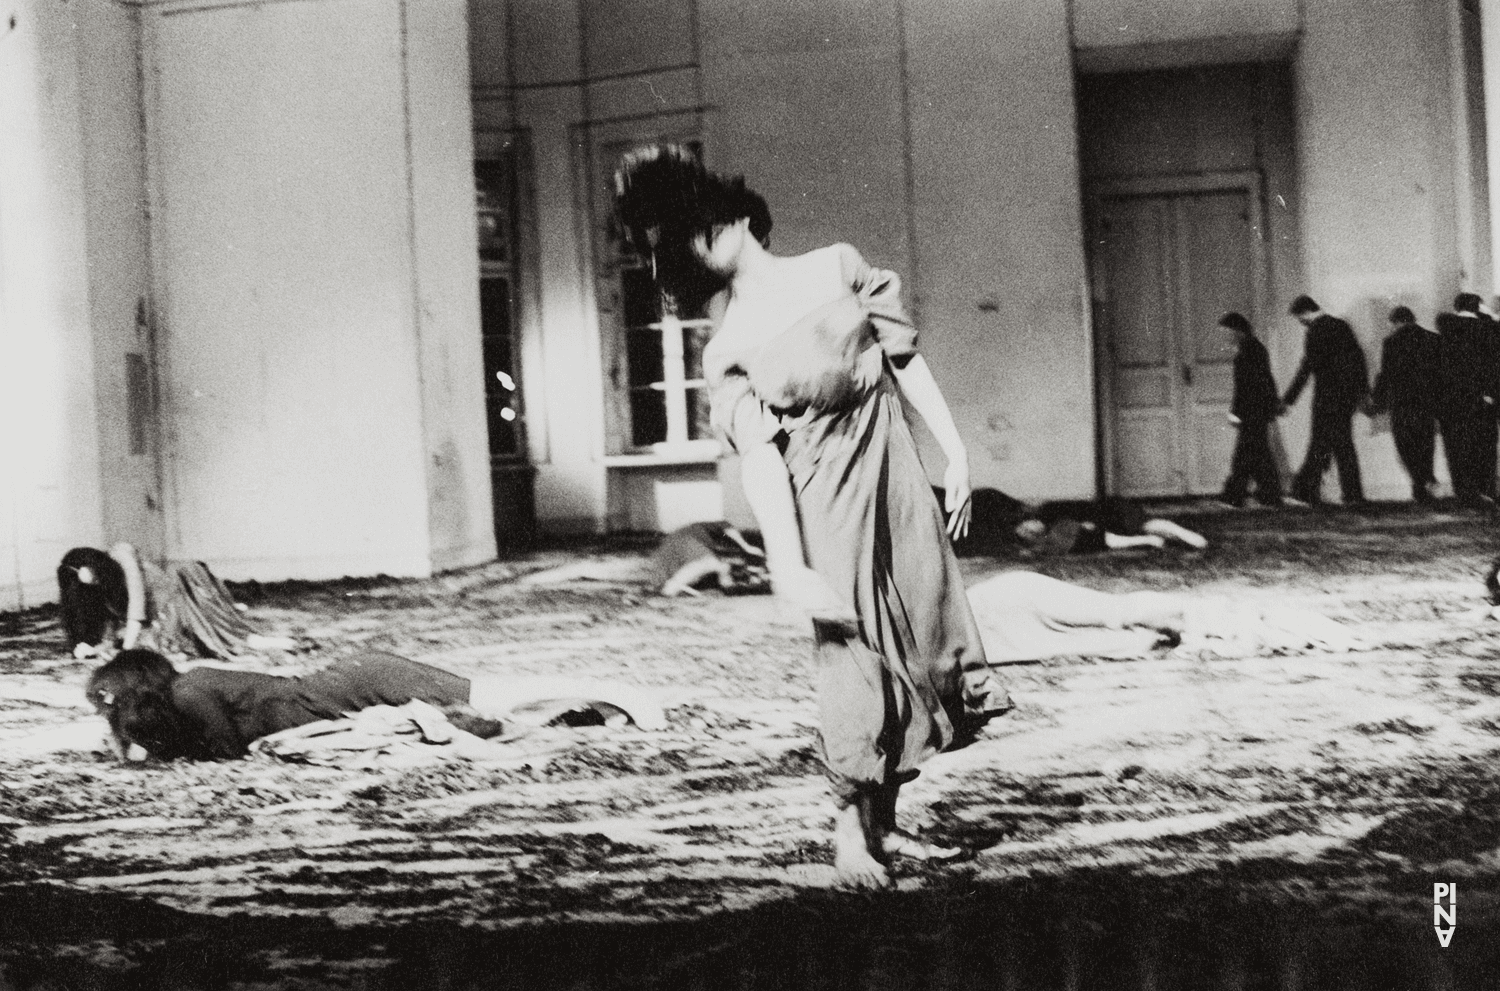 Beatrice Libonati in “Bluebeard. While Listening to a Tape Recording of Béla Bartók's Opera "Duke Bluebeard's Castle"” by Pina Bausch